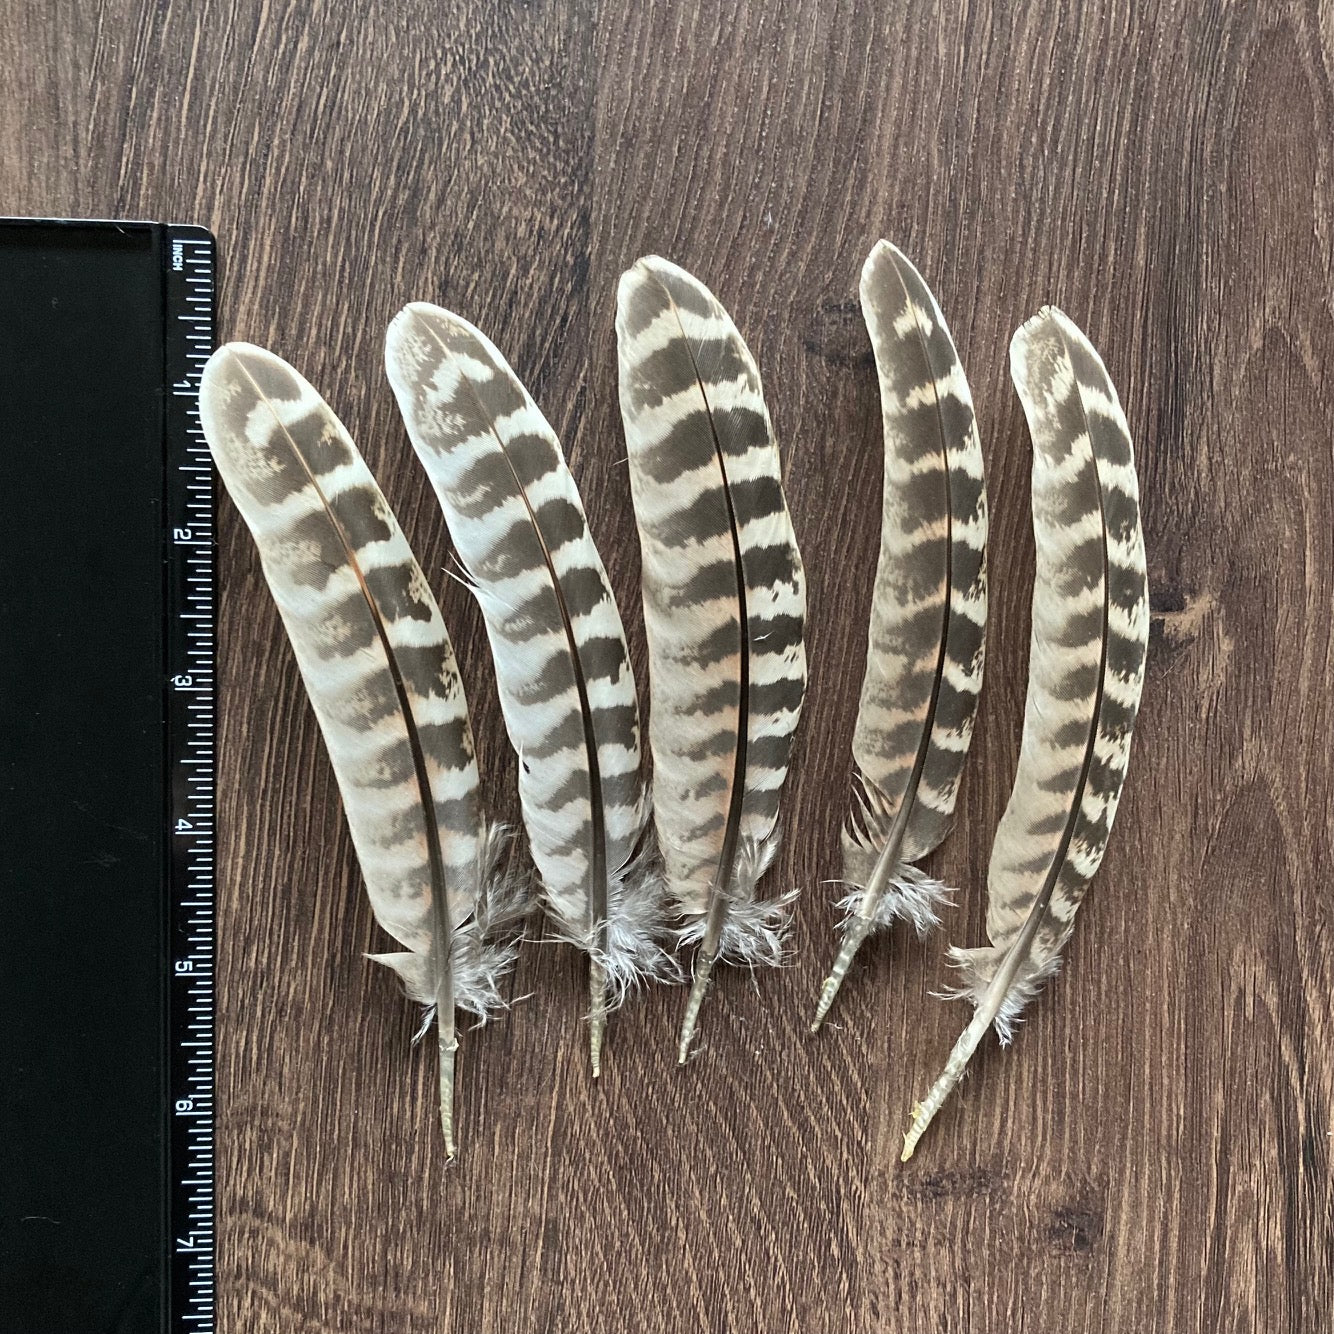 The Feather Shop, Cruelty Free Pheasant Feathers